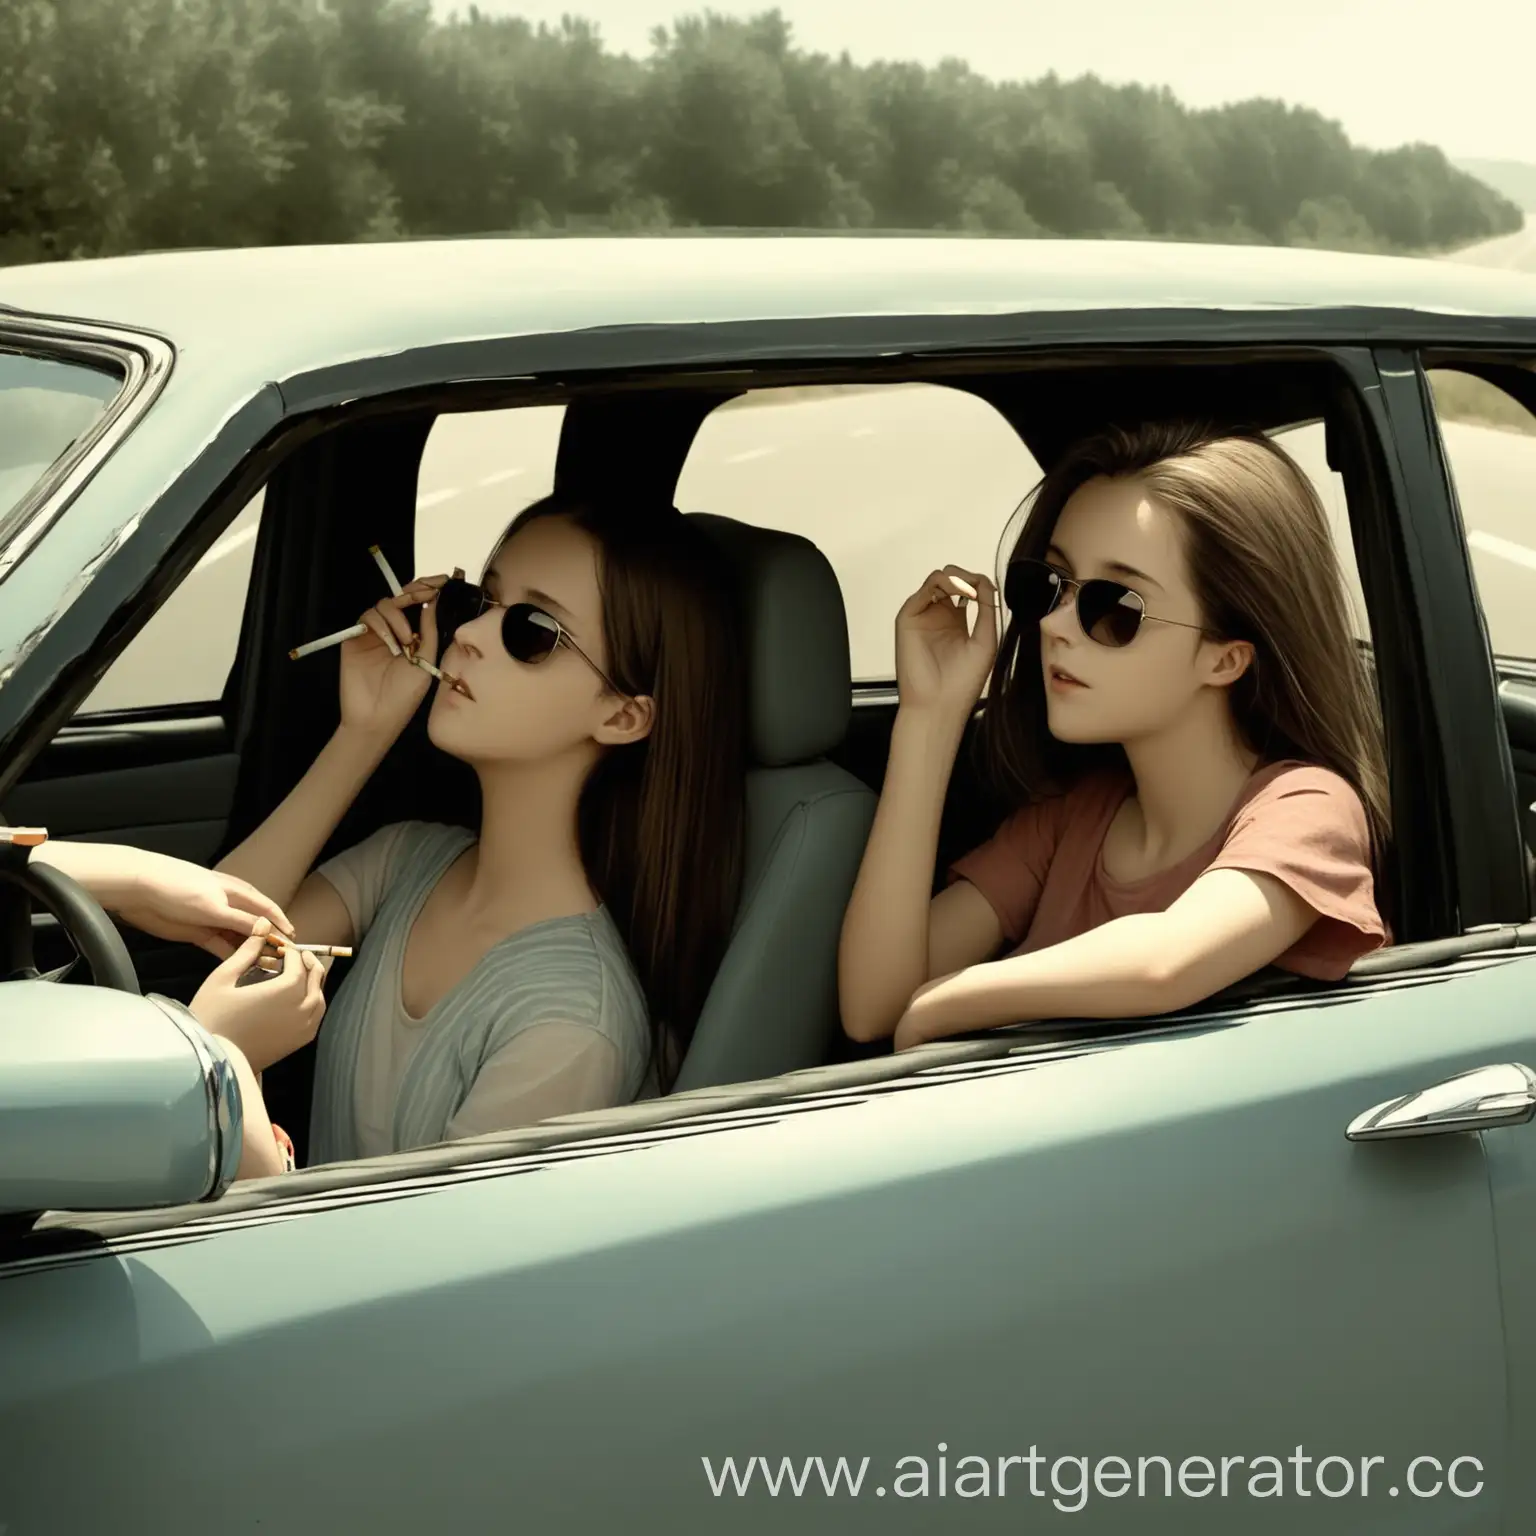 Girls-Driving-Convertible-Car-with-Cigarettes-and-Sunglasses